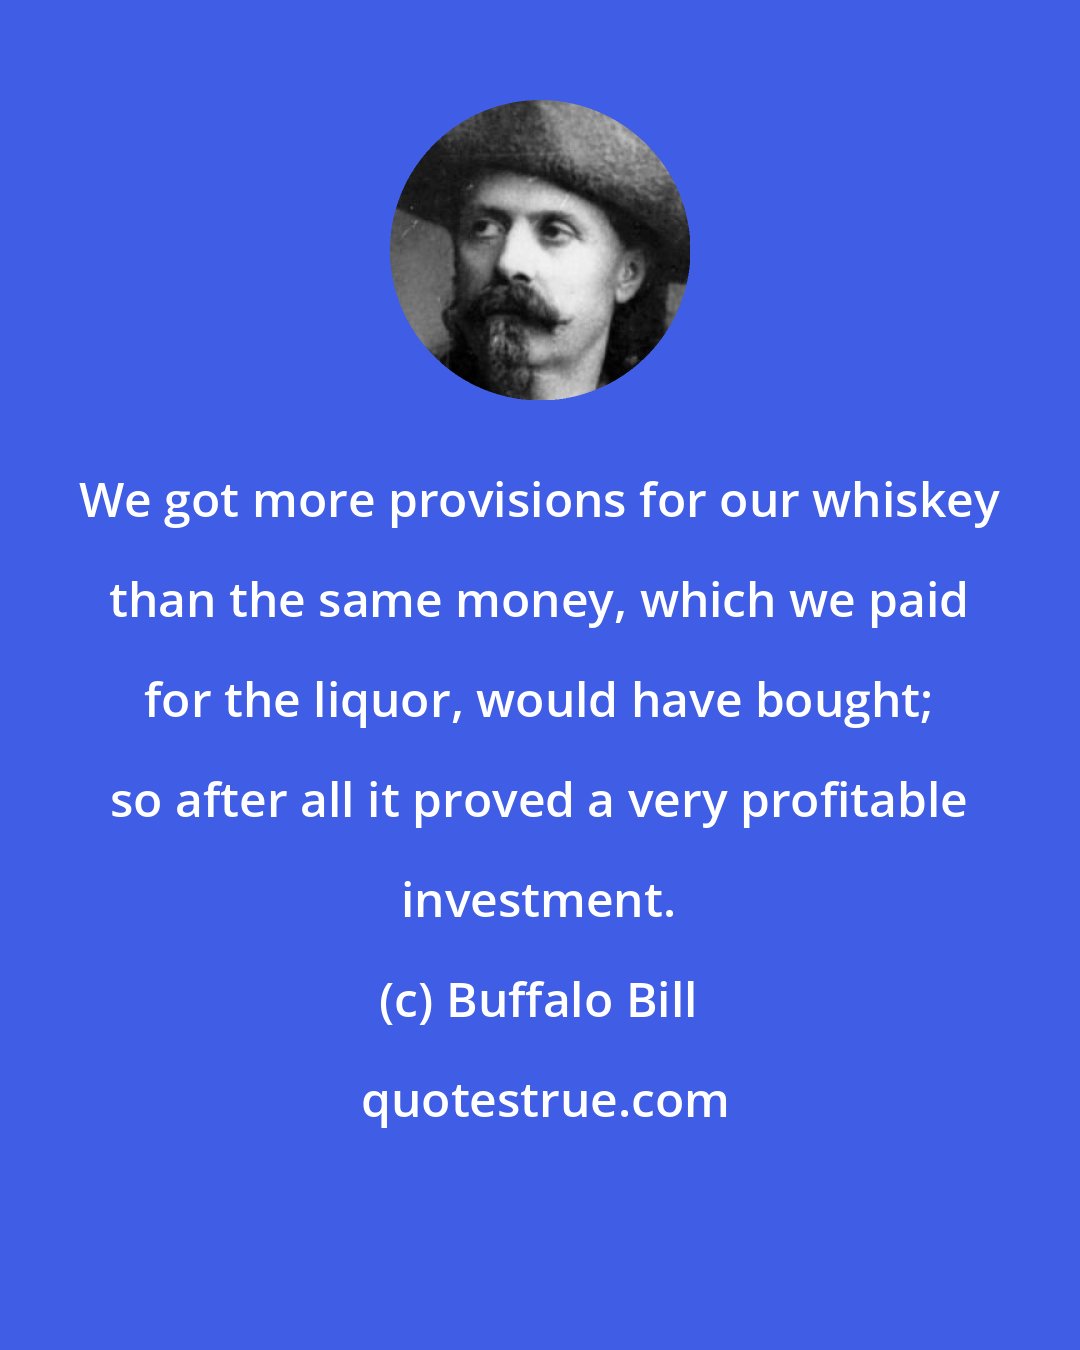 Buffalo Bill: We got more provisions for our whiskey than the same money, which we paid for the liquor, would have bought; so after all it proved a very profitable investment.